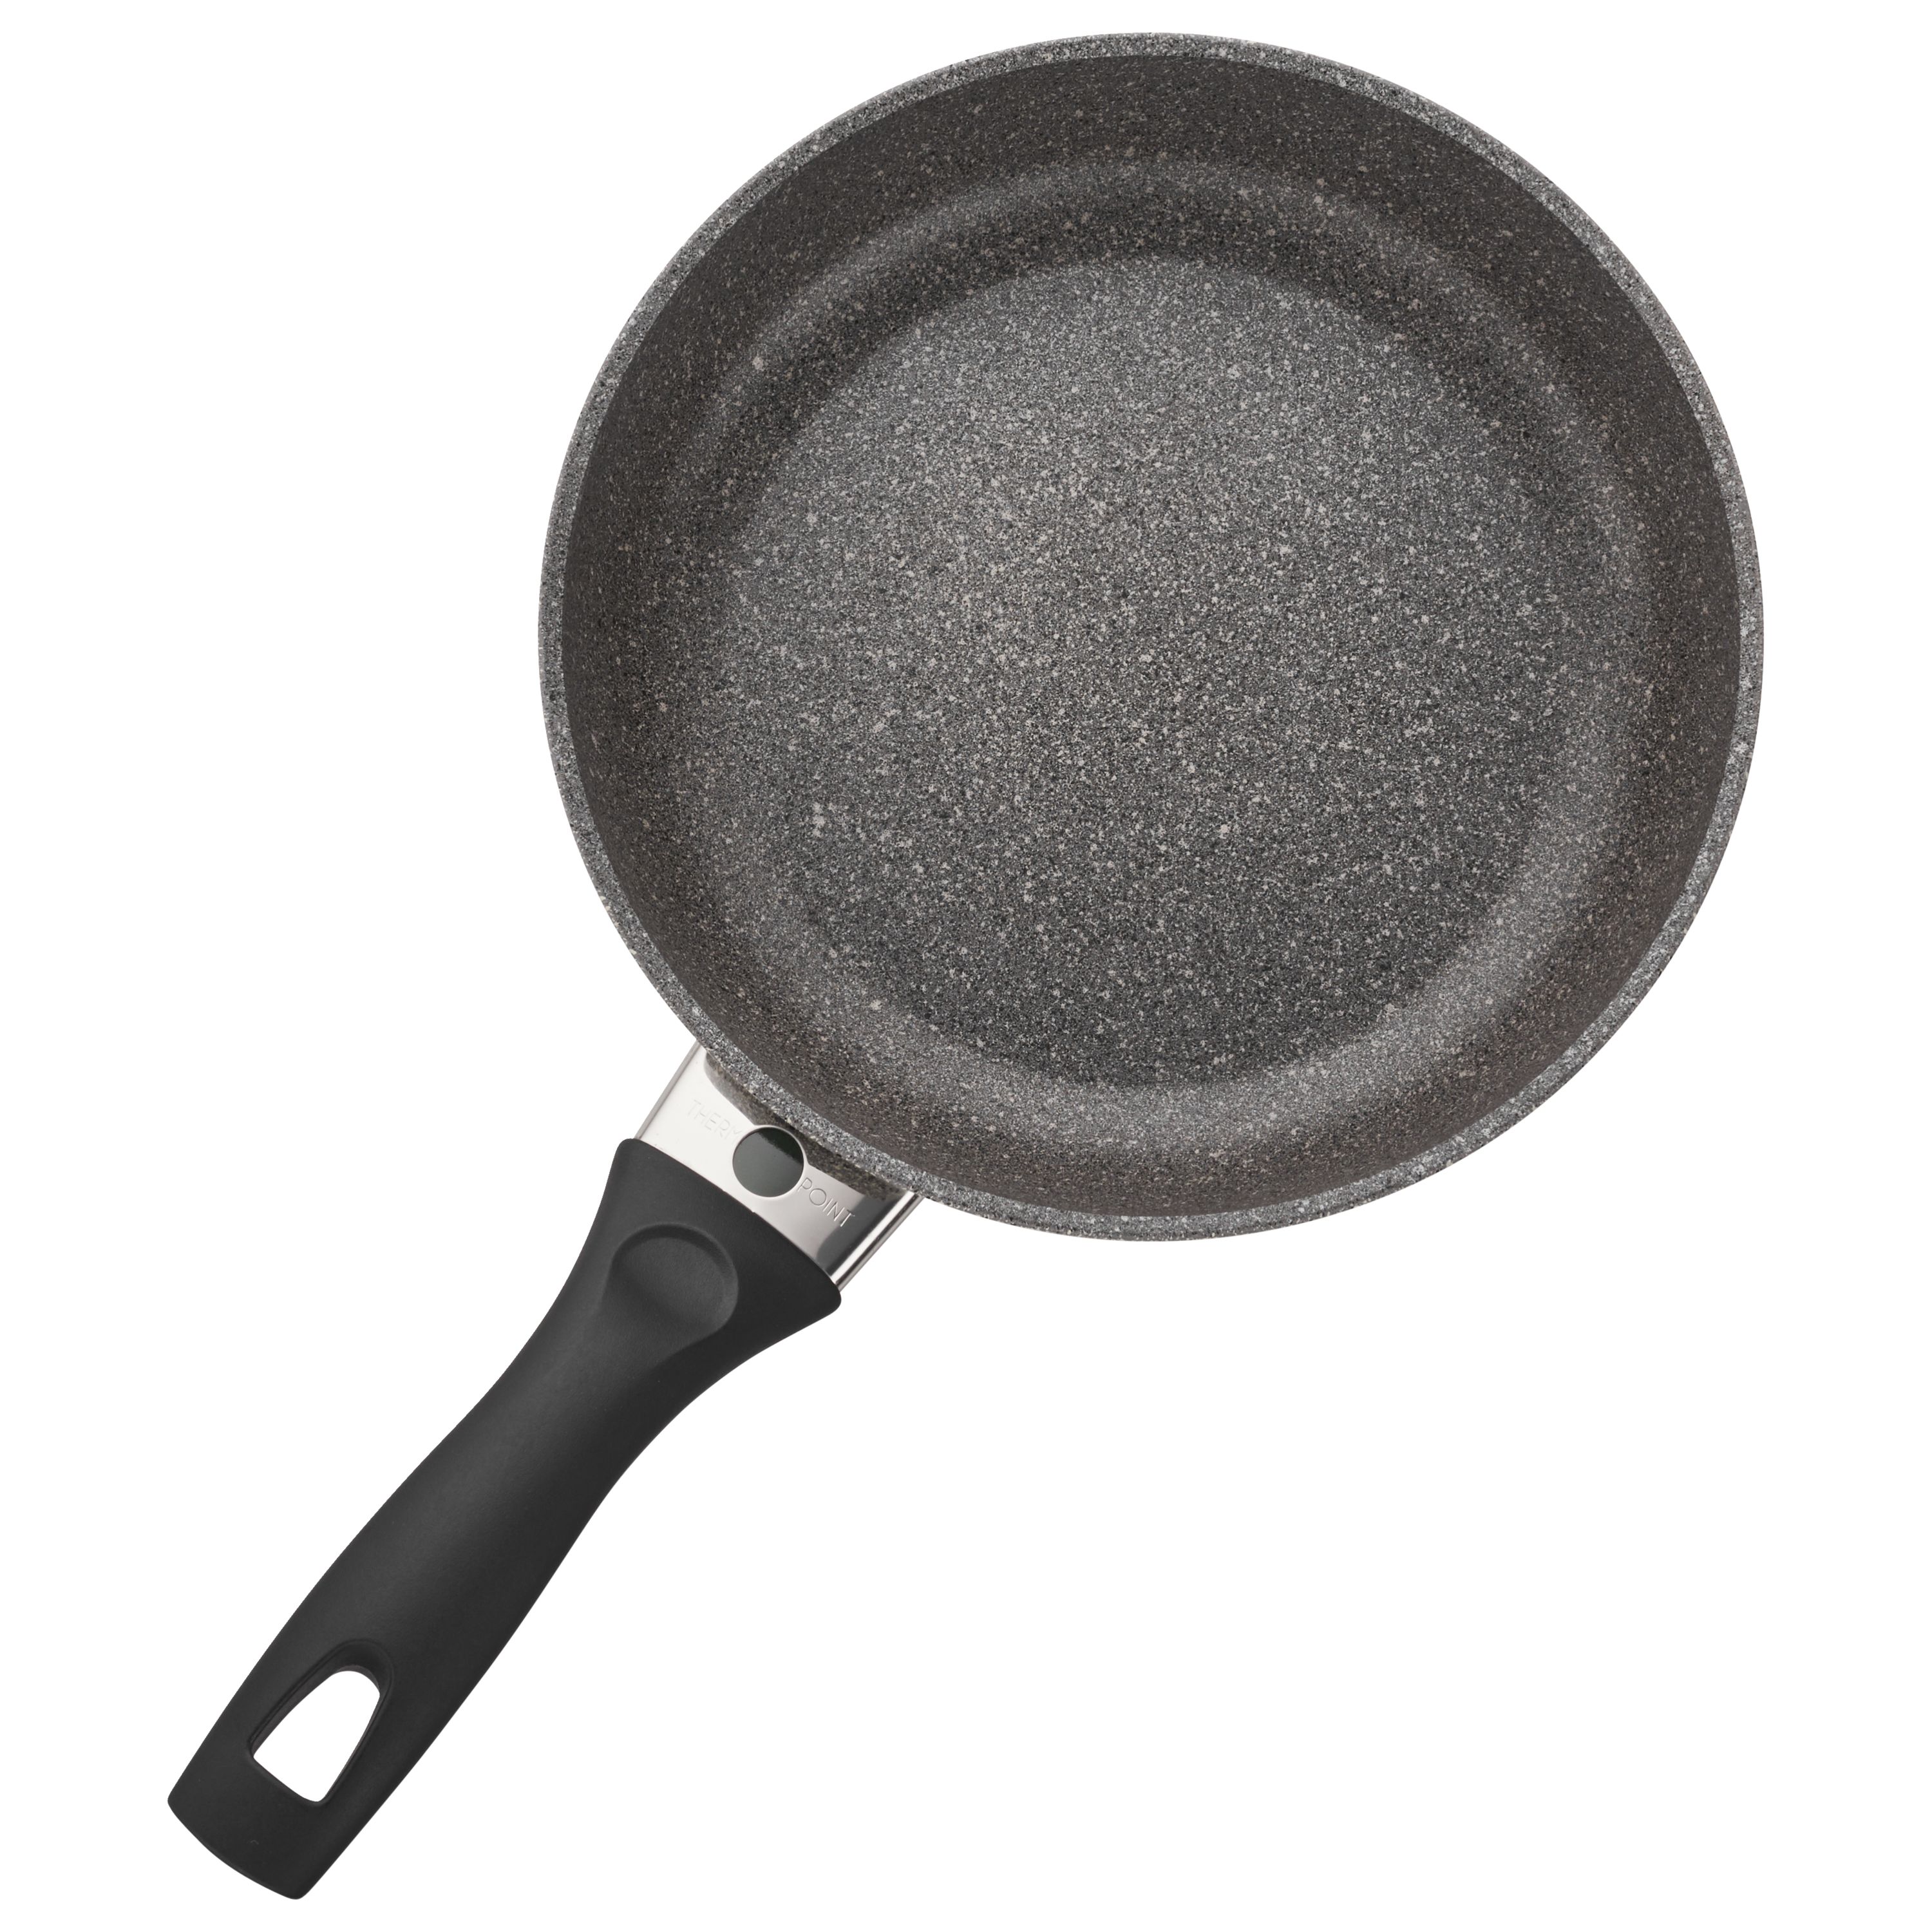 Best Shallow Pan For Soup, Non Stick Pan For Fried Eggs, Gas